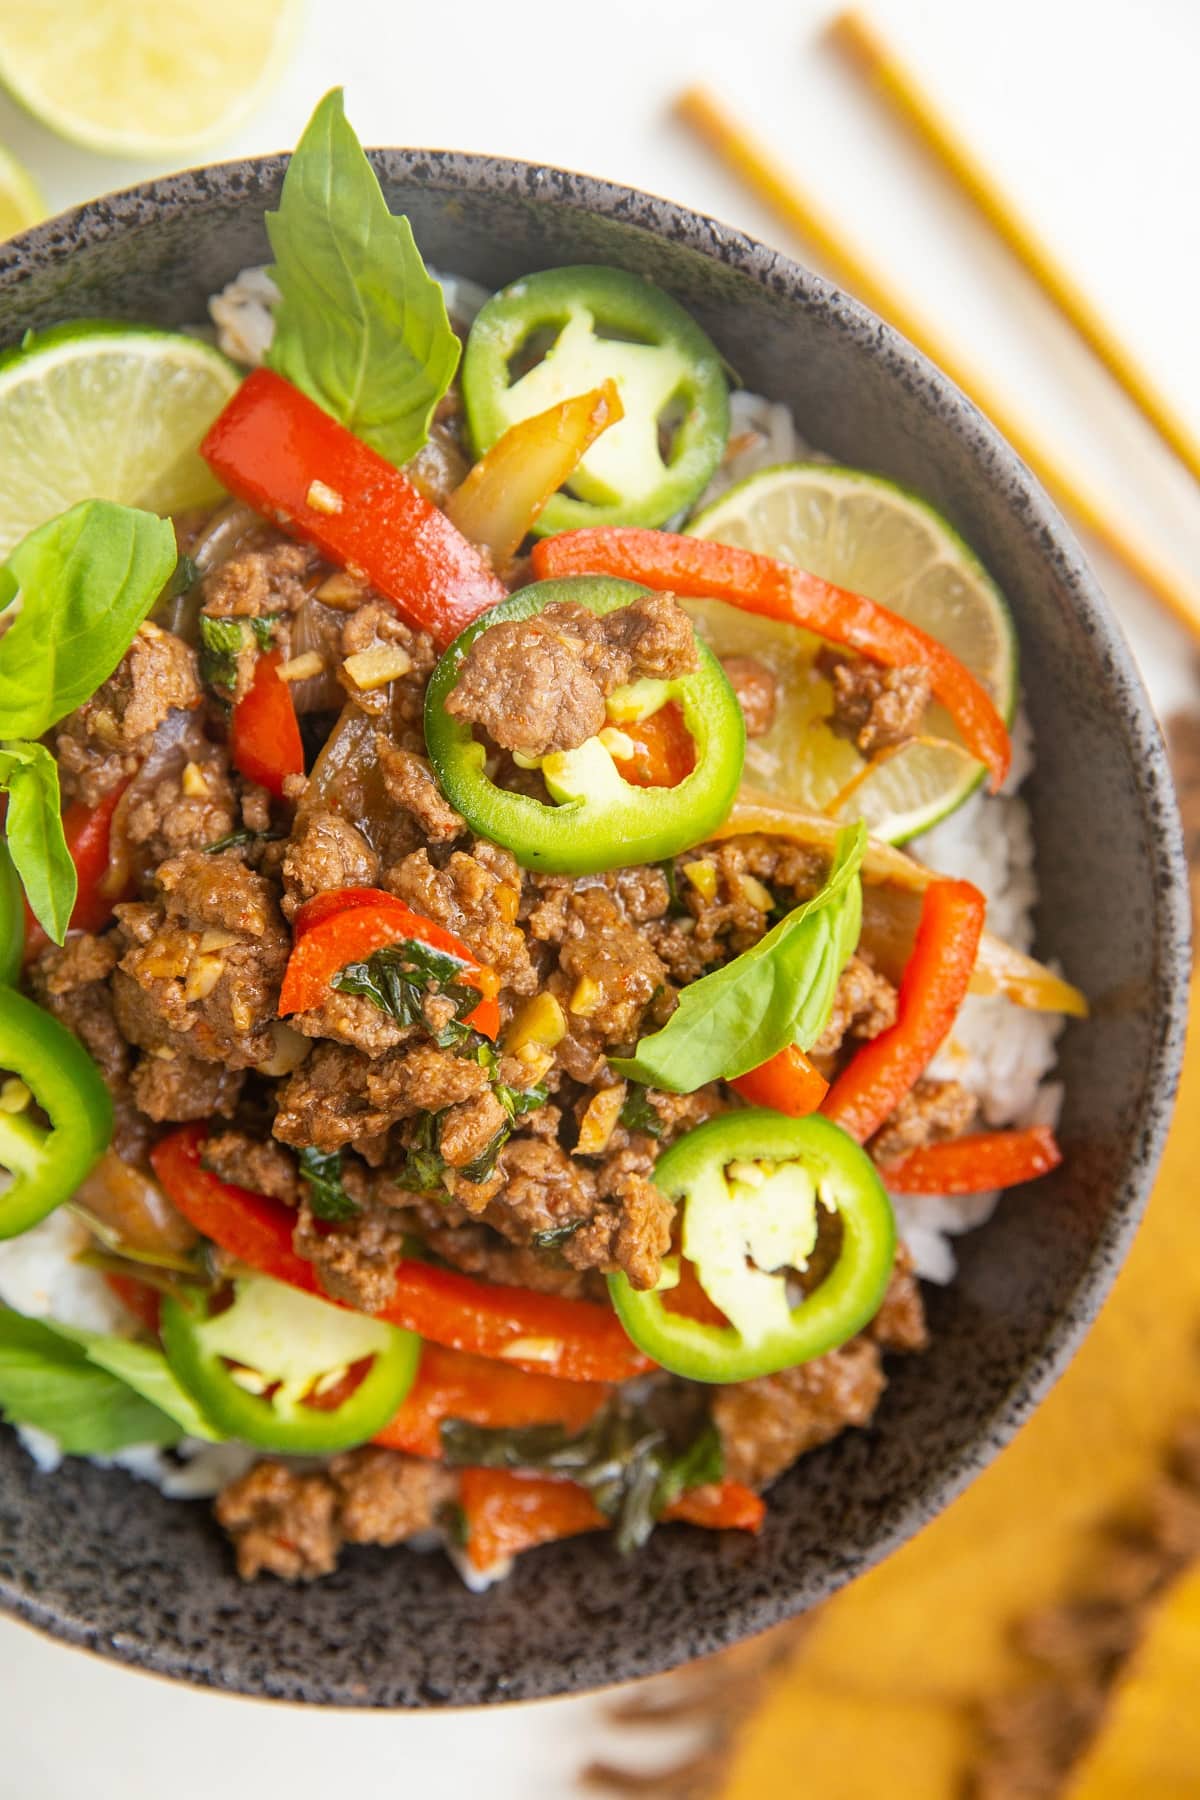 Healthy 30-Minute Thai Basil Beef (Pad Gra Prow) is savory, sweet, with just the right amount of kick. Easy to prepare any night of the week for a healthy easy dinner recipe! Gluten-free, soy-free, refined sugar-free, whole30 and paleo.